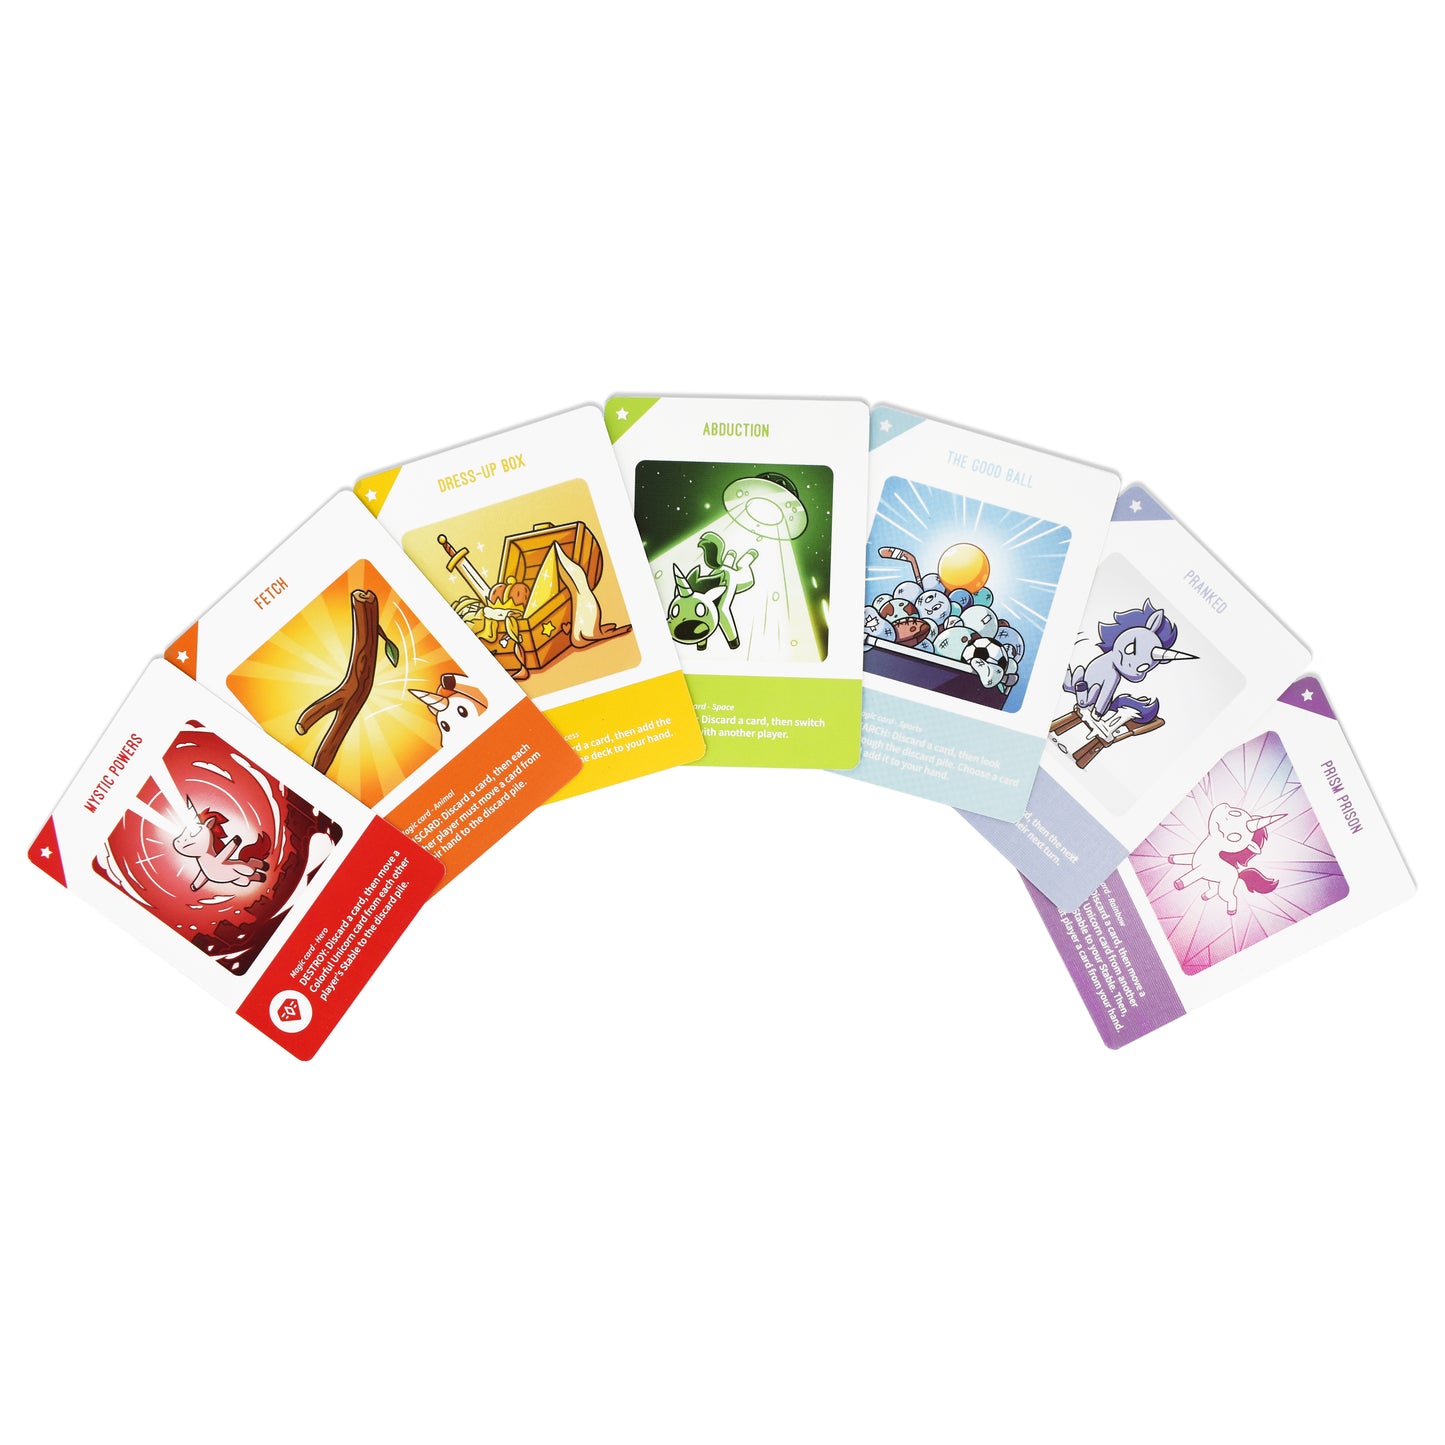 A fan of colorful illustrated cards featuring playful unicorns in various scenarios and costumes, arranged in a semicircle, would enjoy Unstable Unicorns for Kids: Base Game by Unstable Games.